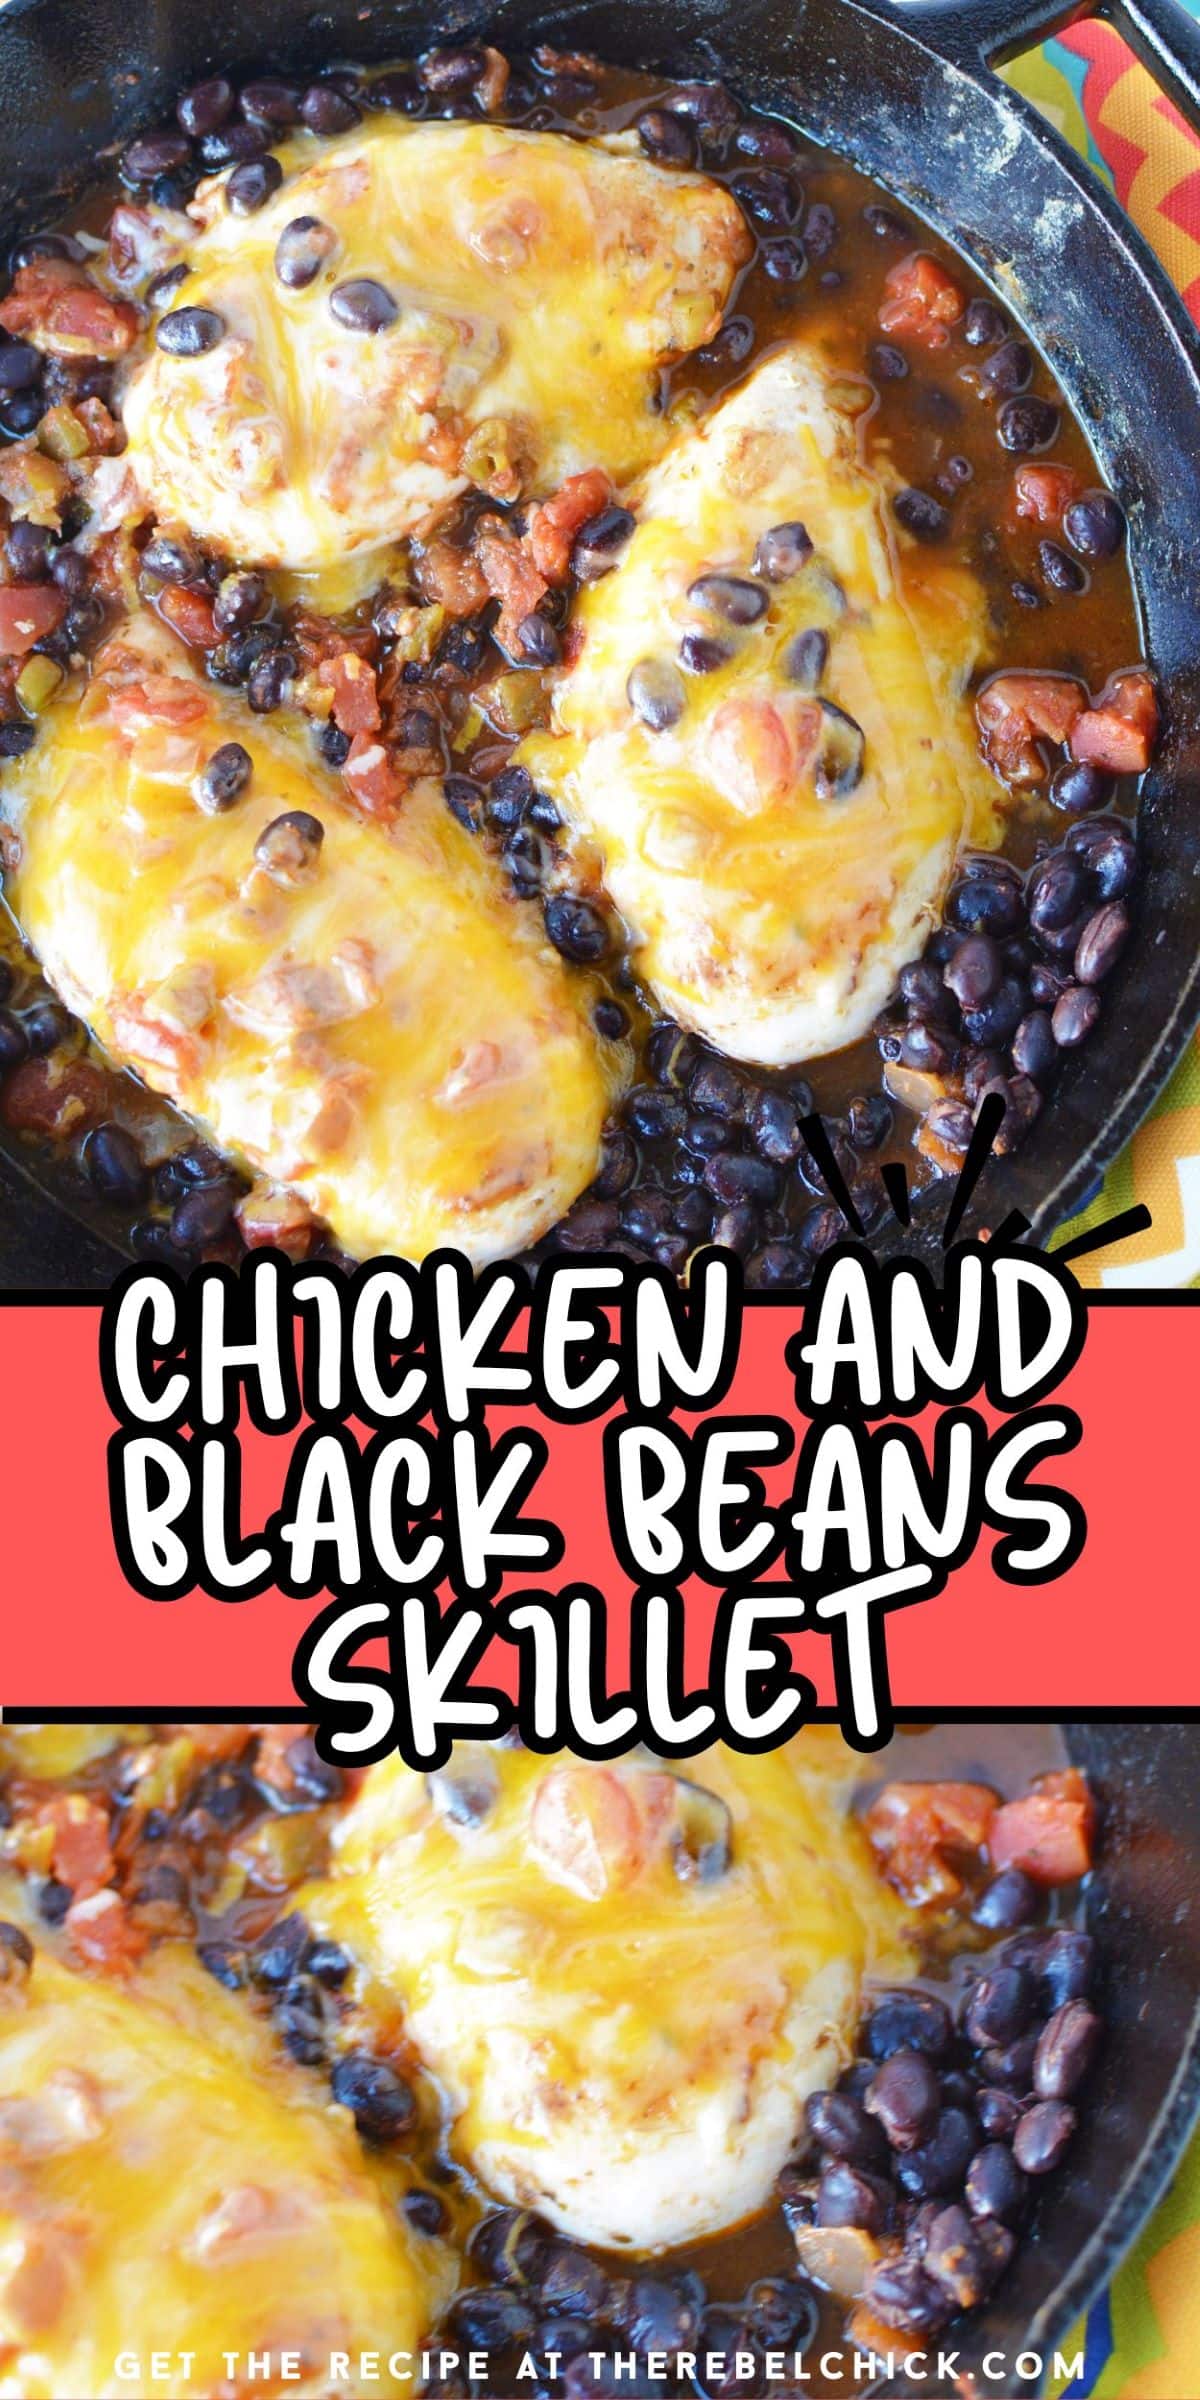 Chicken and Black Beans Skillet